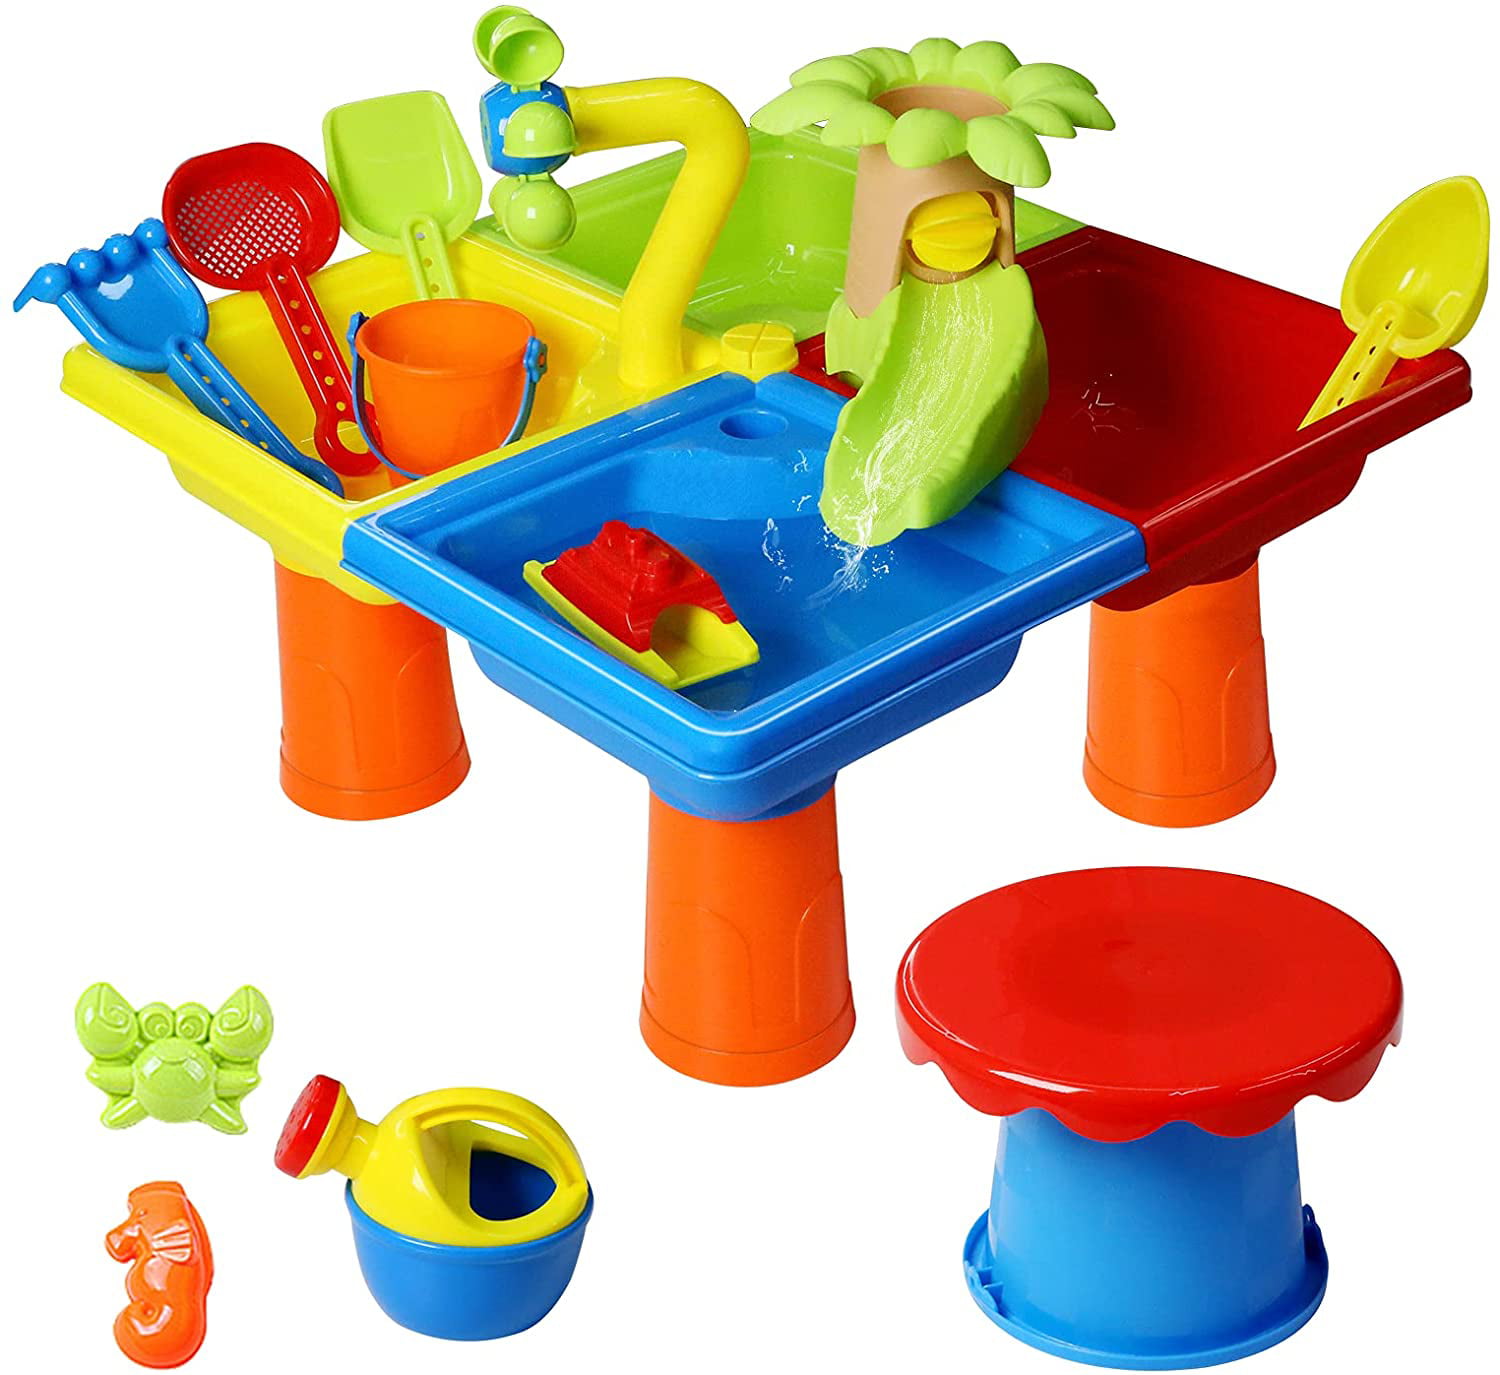 Water Sand Table Molds Beach Tool Kit Beach Toys Sand Toys Set Kids Sand Pit Set Beach Table Play House Toy Tools for Kids Boys and Girls 